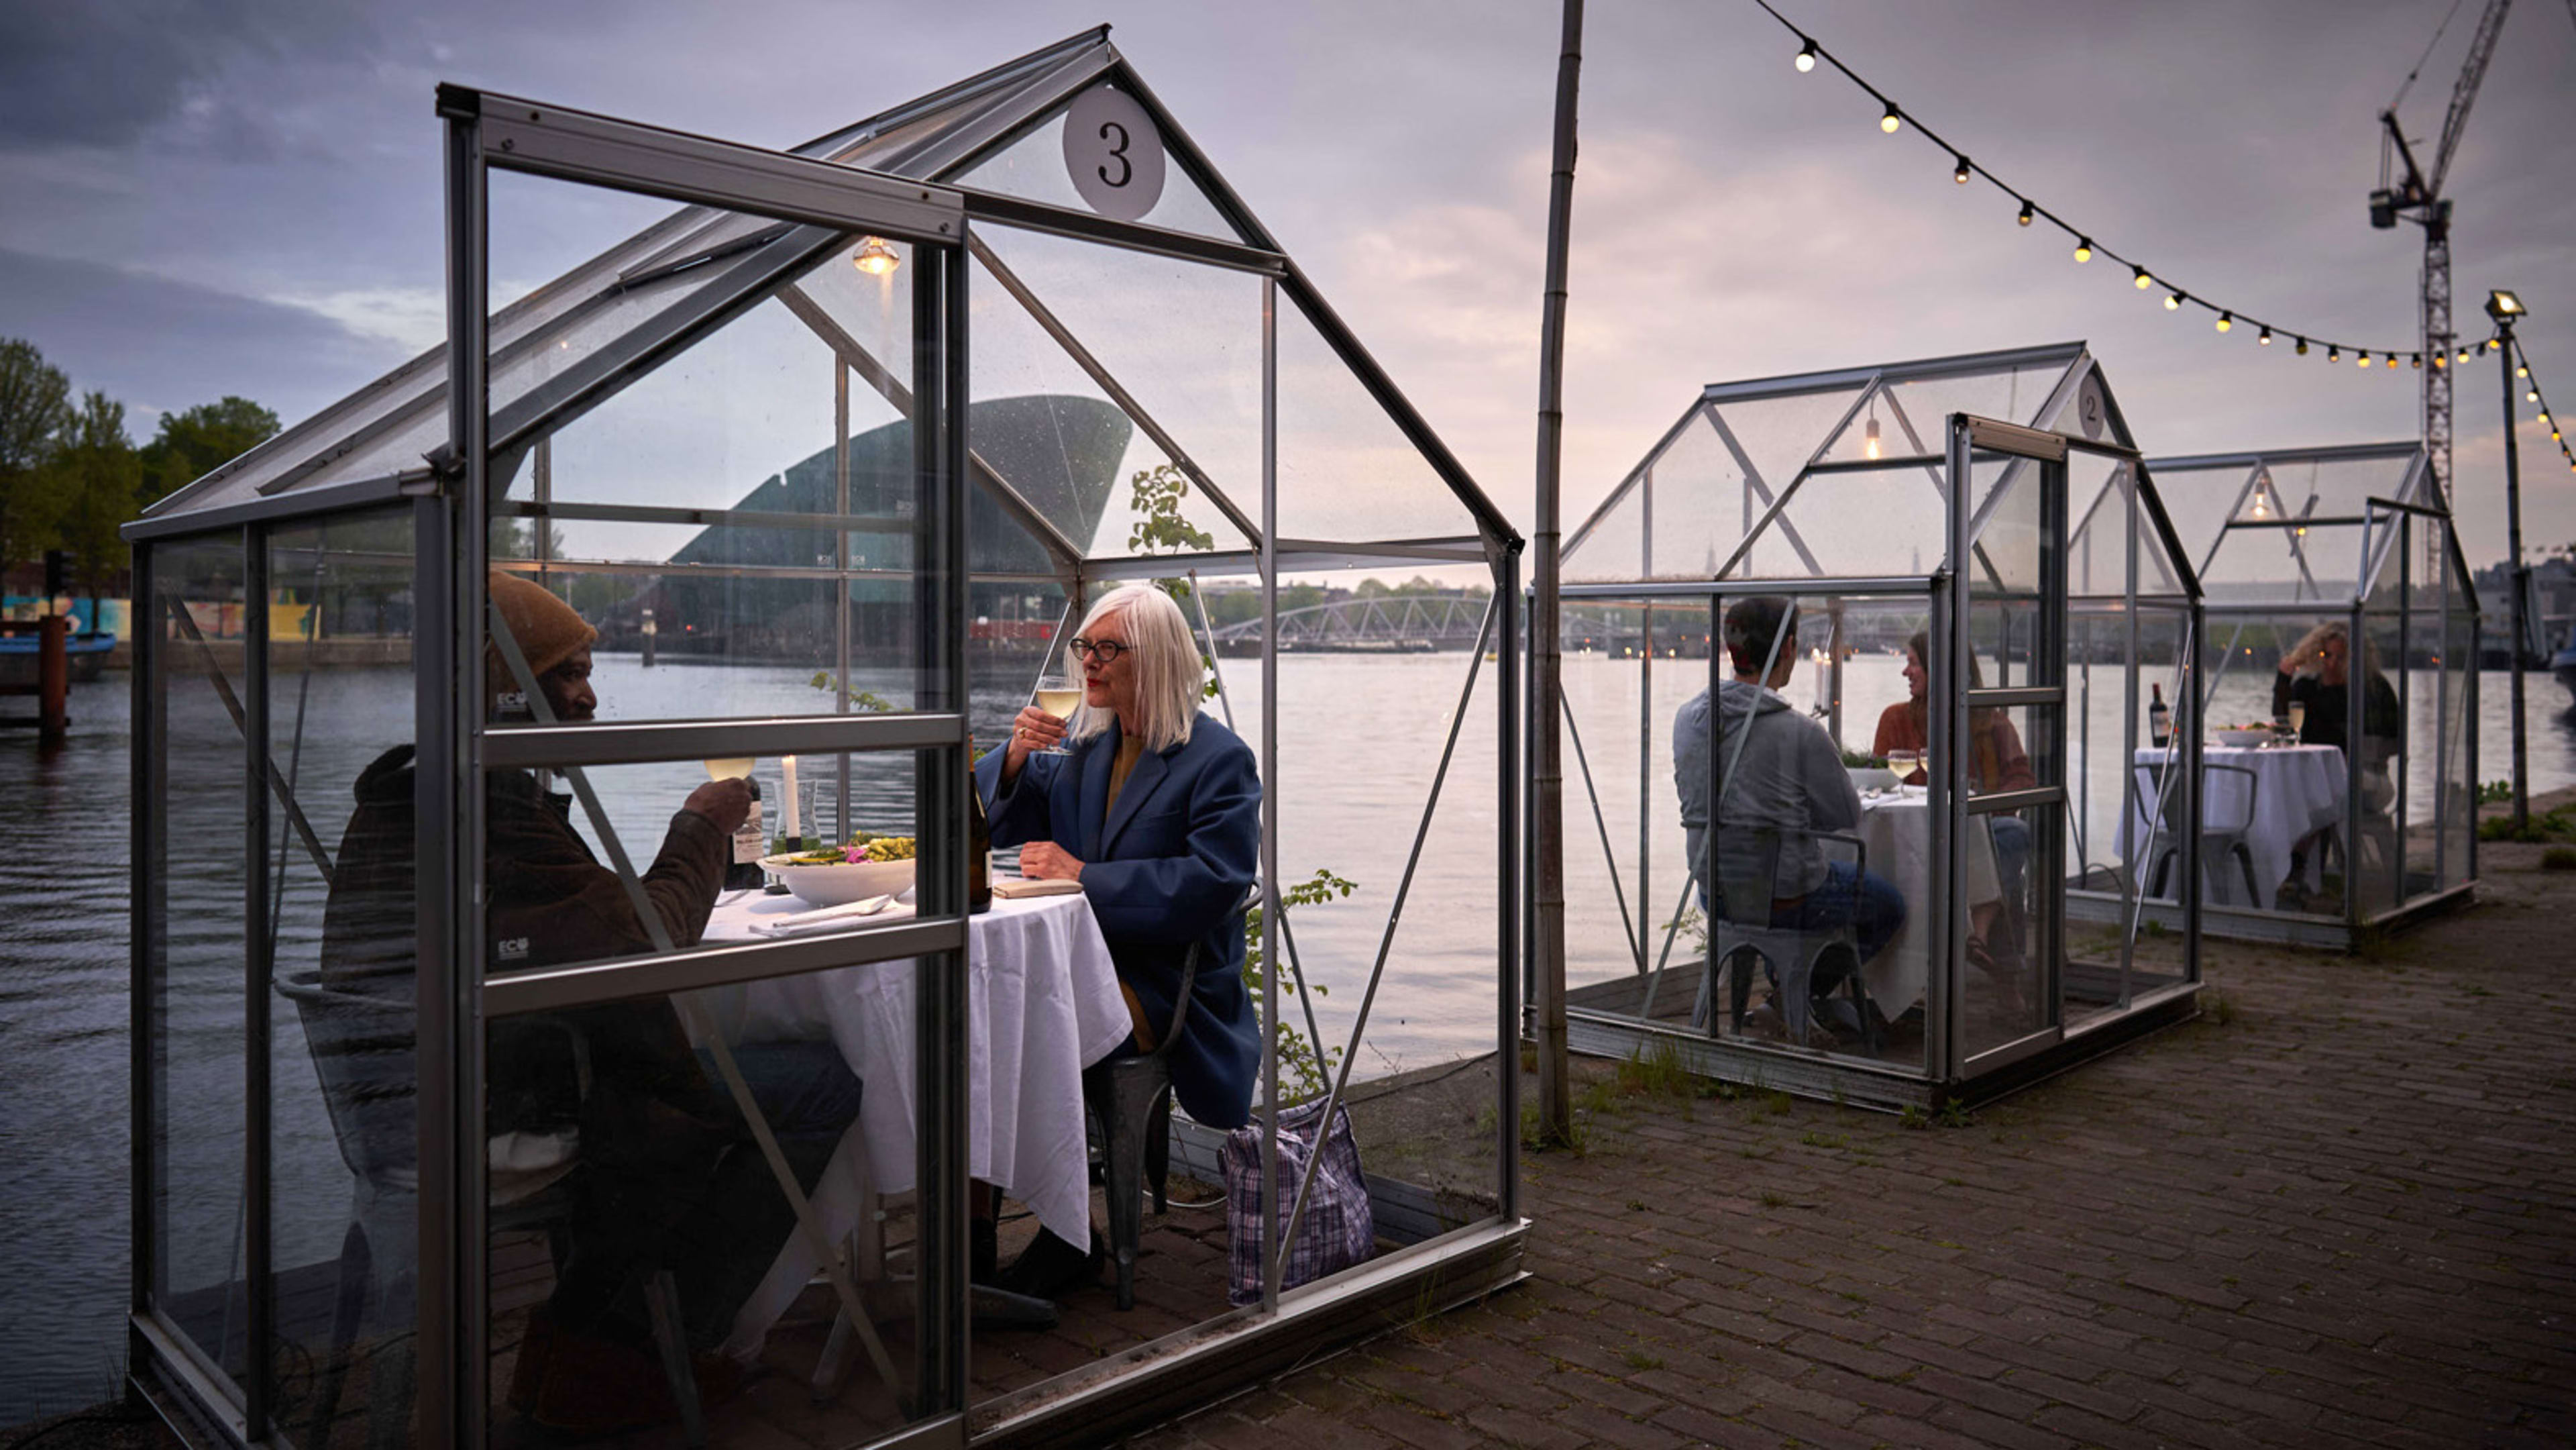 The future of fine dining? An exclusive biodome for you and your date